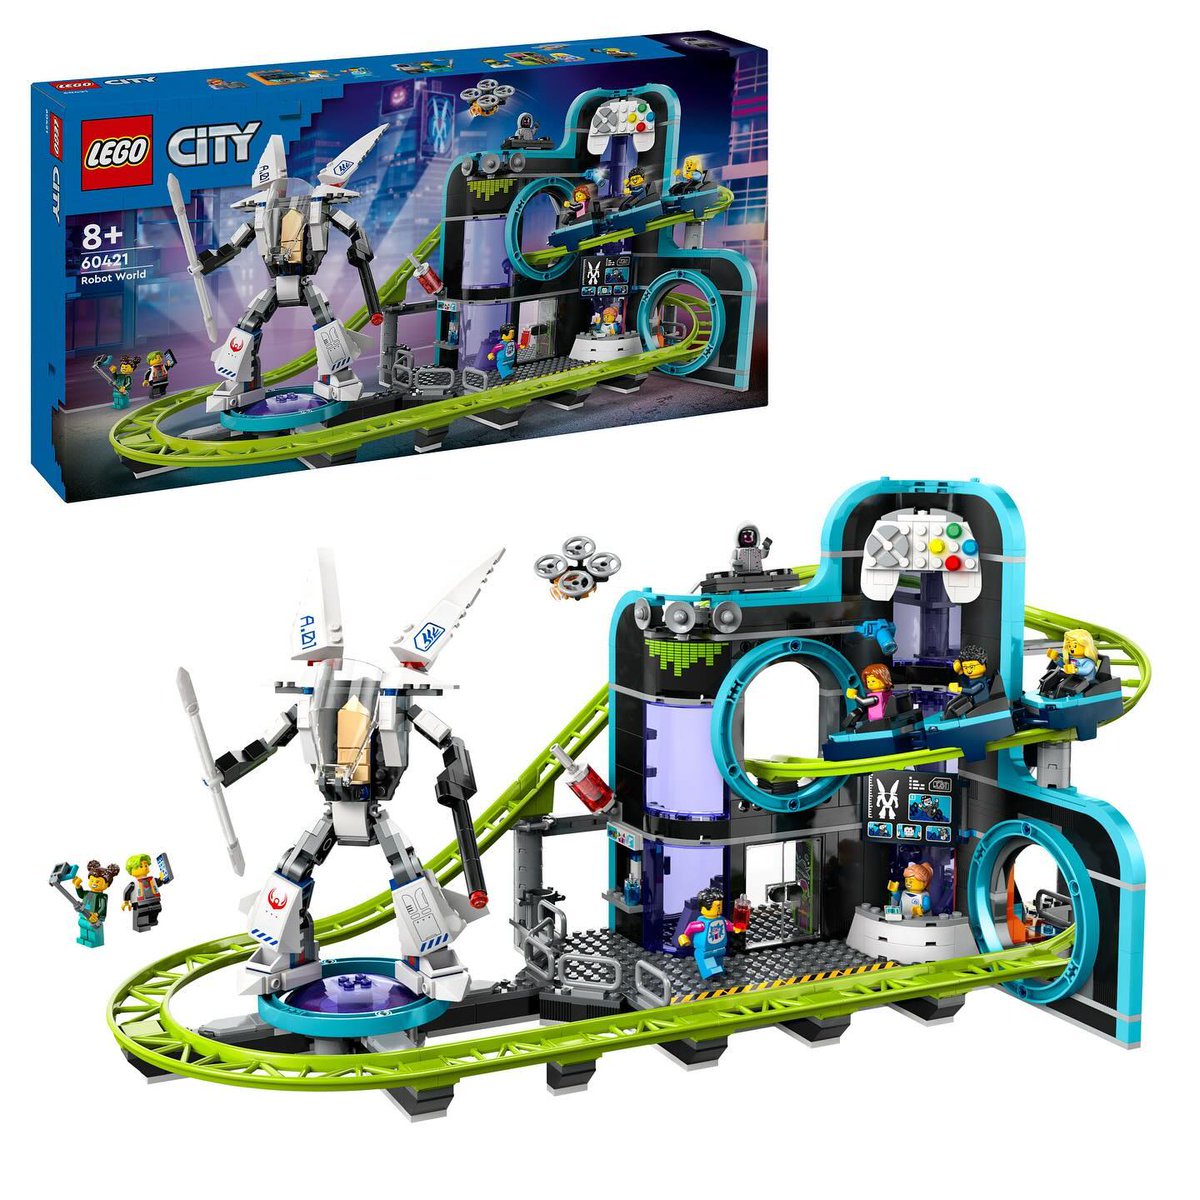 'LEGO EXO-FORCE HAS RETURNED IN LEGO CITY.' *LEGO City HEY commercial voice*